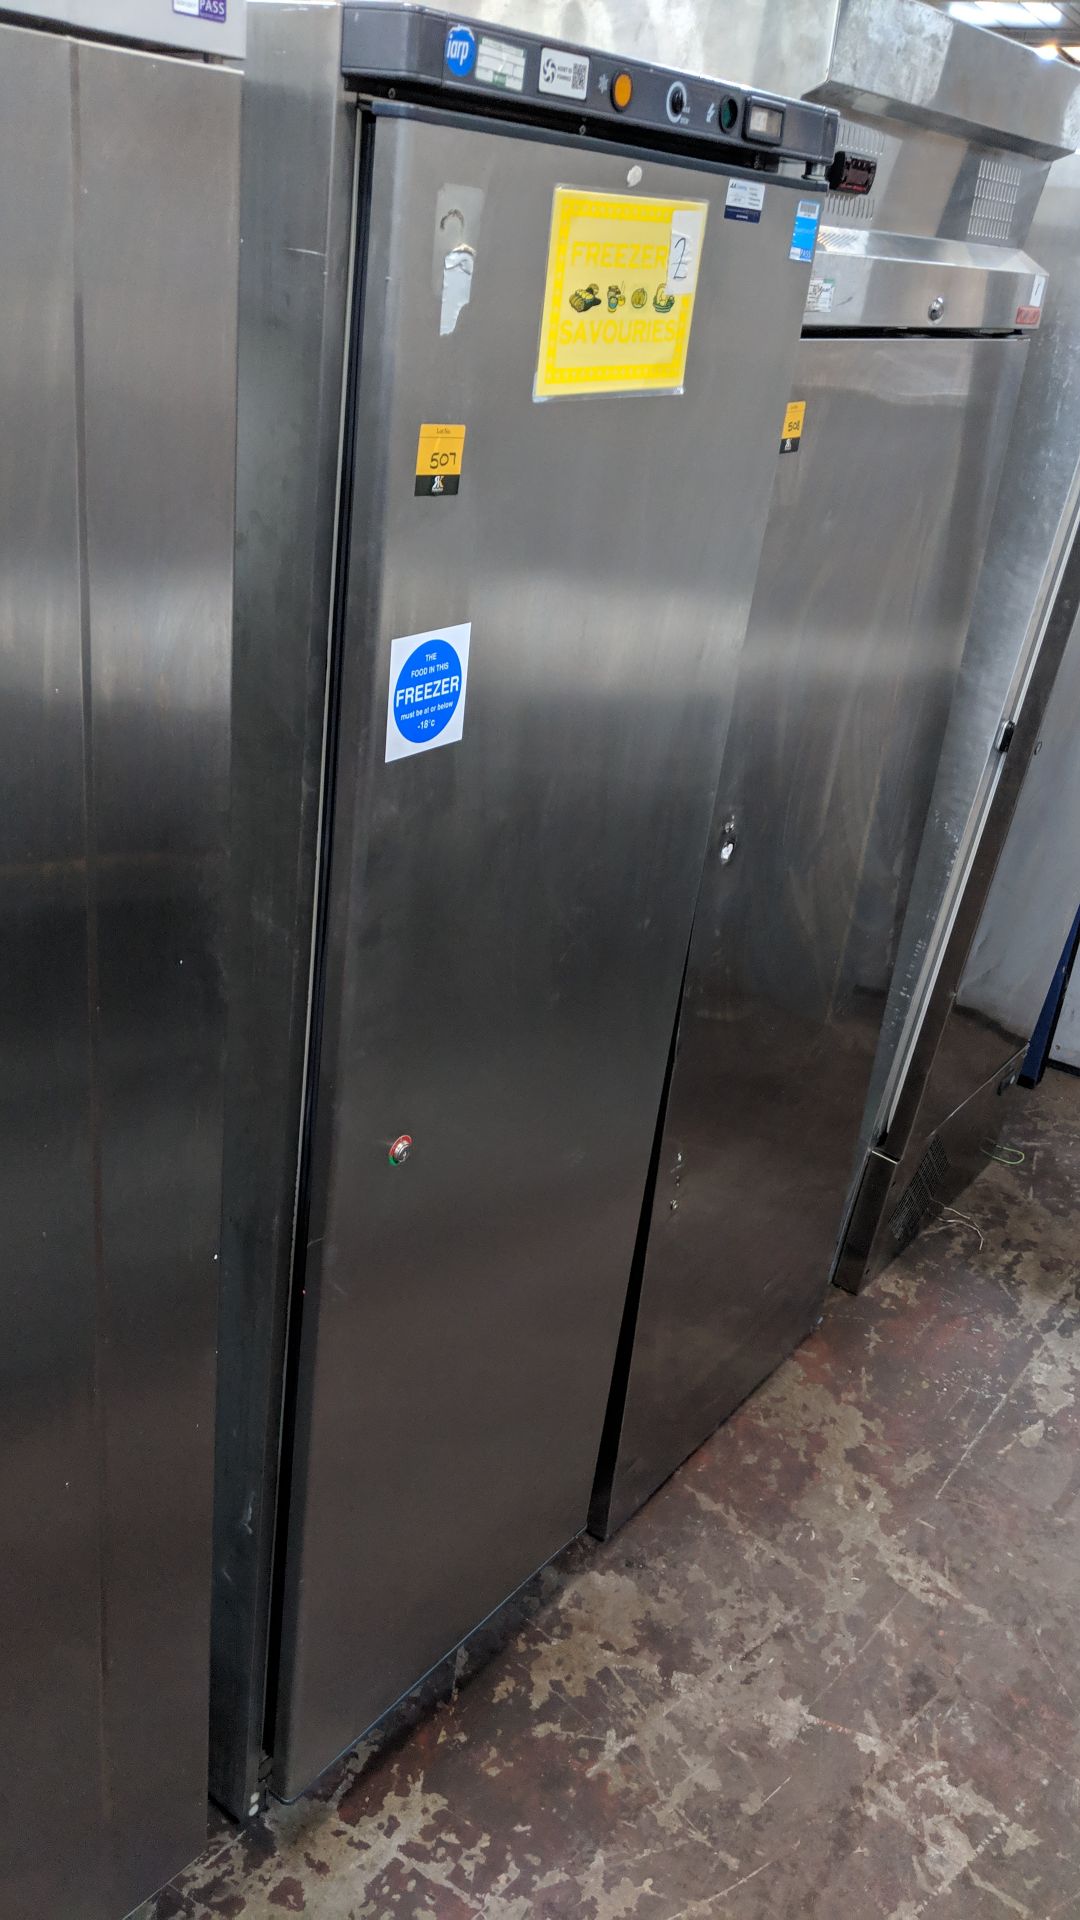 Iarp tall silver freezer, ABX400N IMPORTANT: Please remember goods successfully bid upon must be